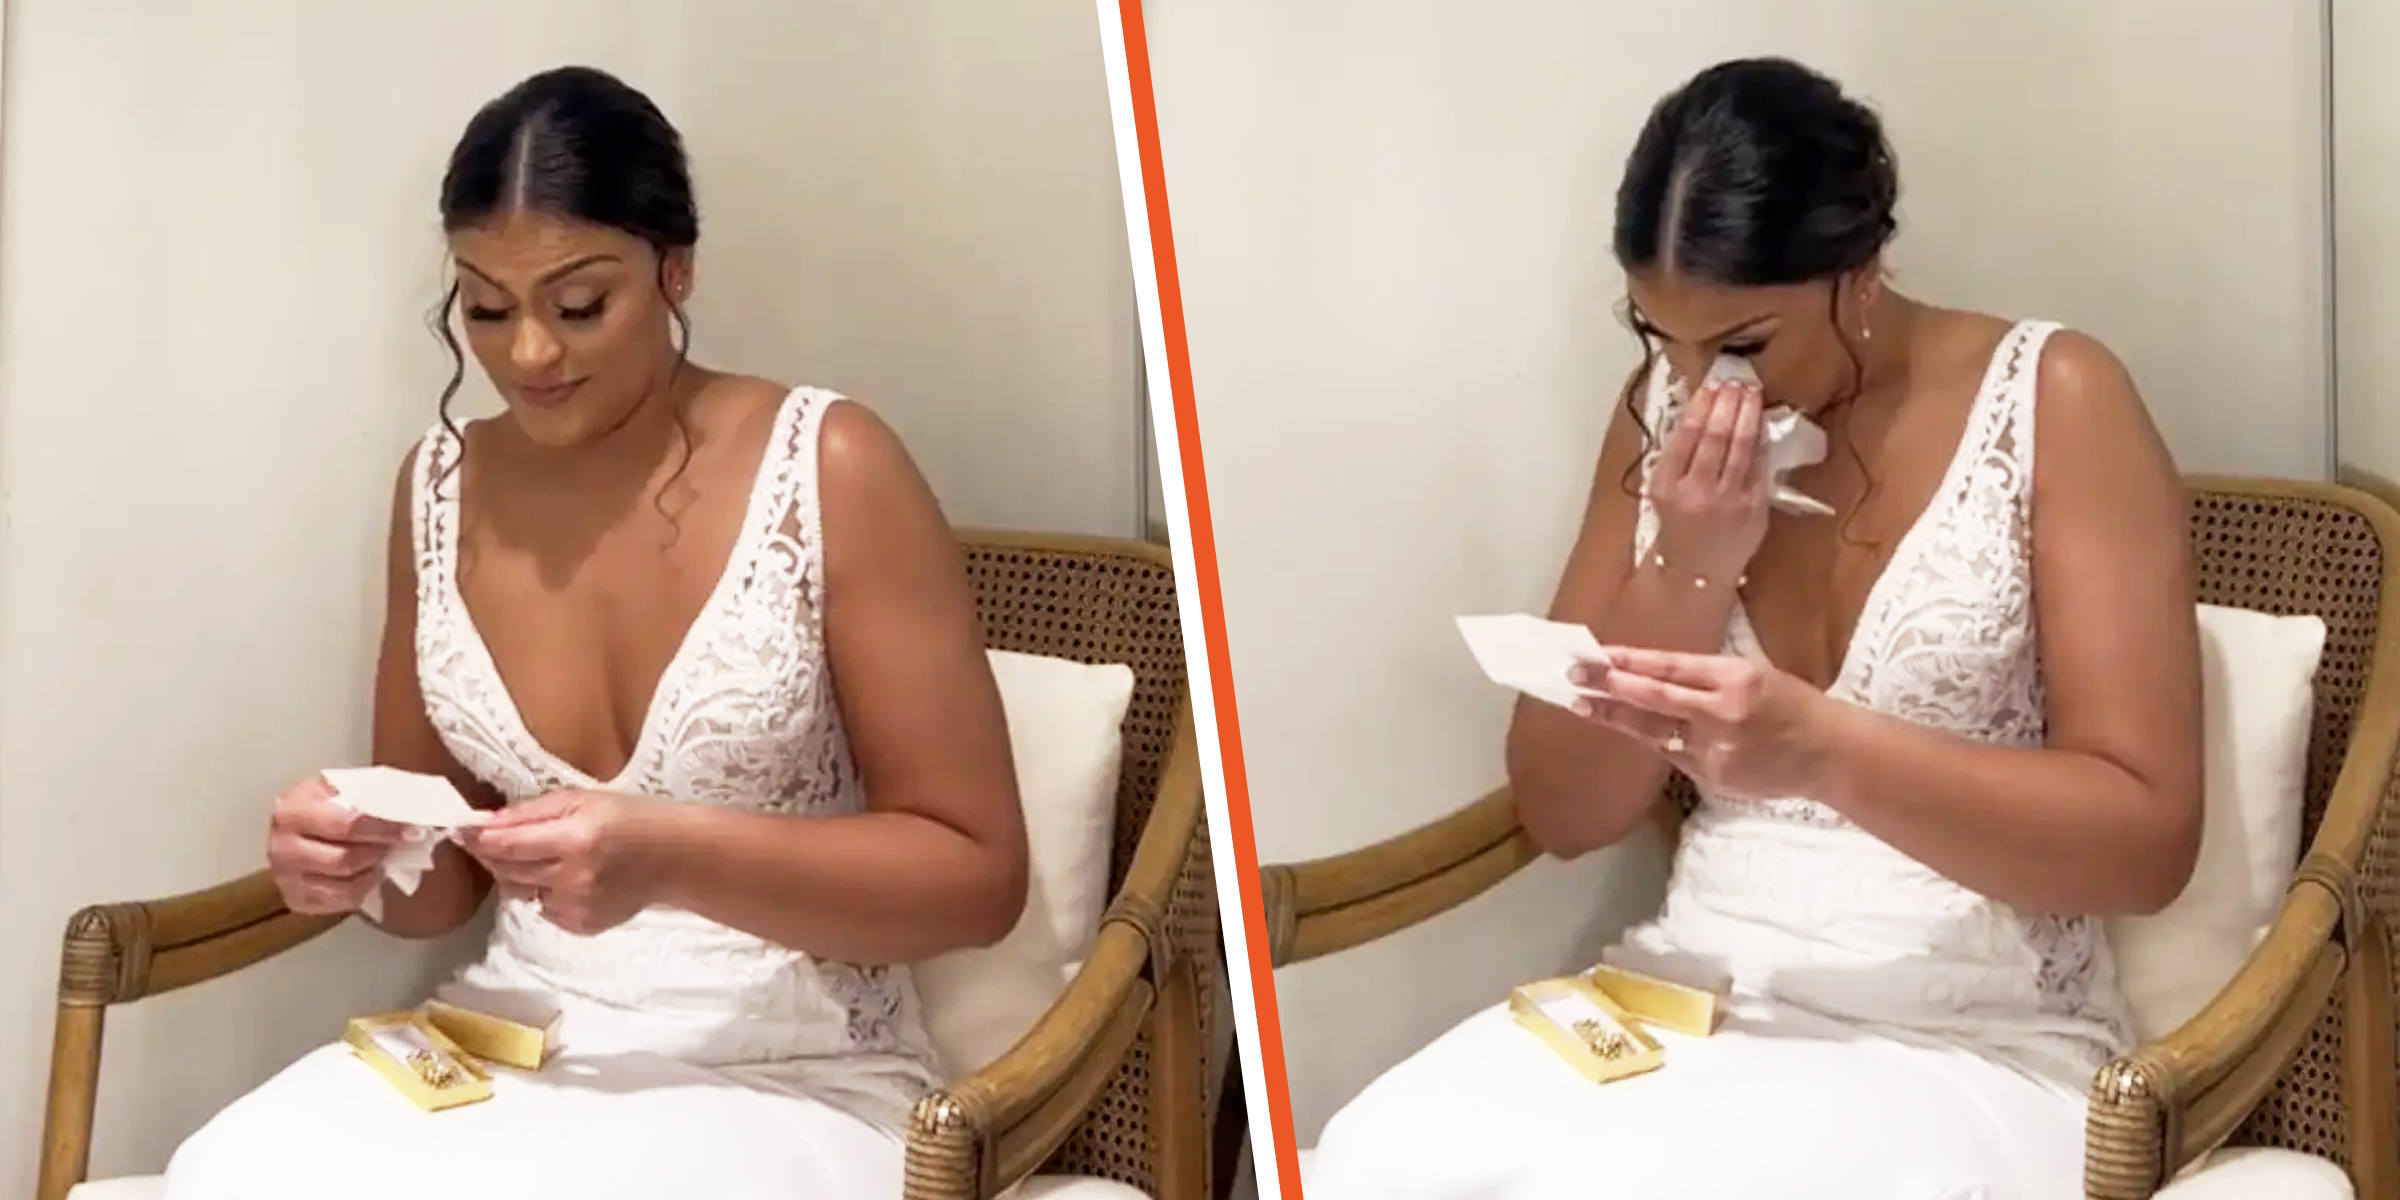 Bride receives unexpected gift from the groom only realize it wasn't for her. | Source: tiktok.com/kayrae.e